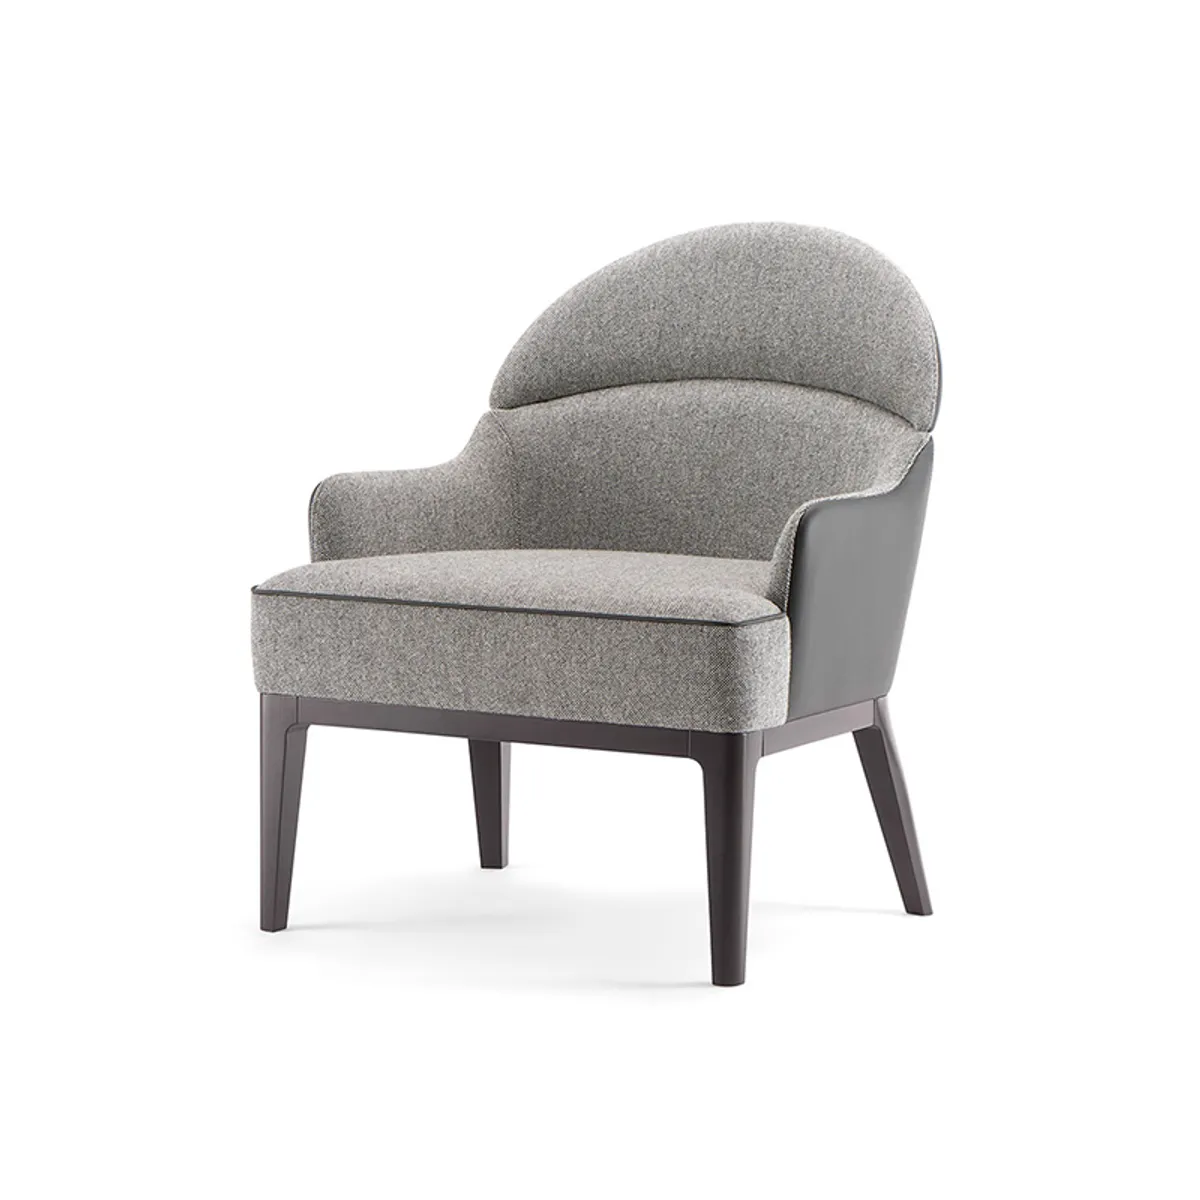 Dallas Lounge Chair Contemporary Upholstered Furniture Insideoutcontracts